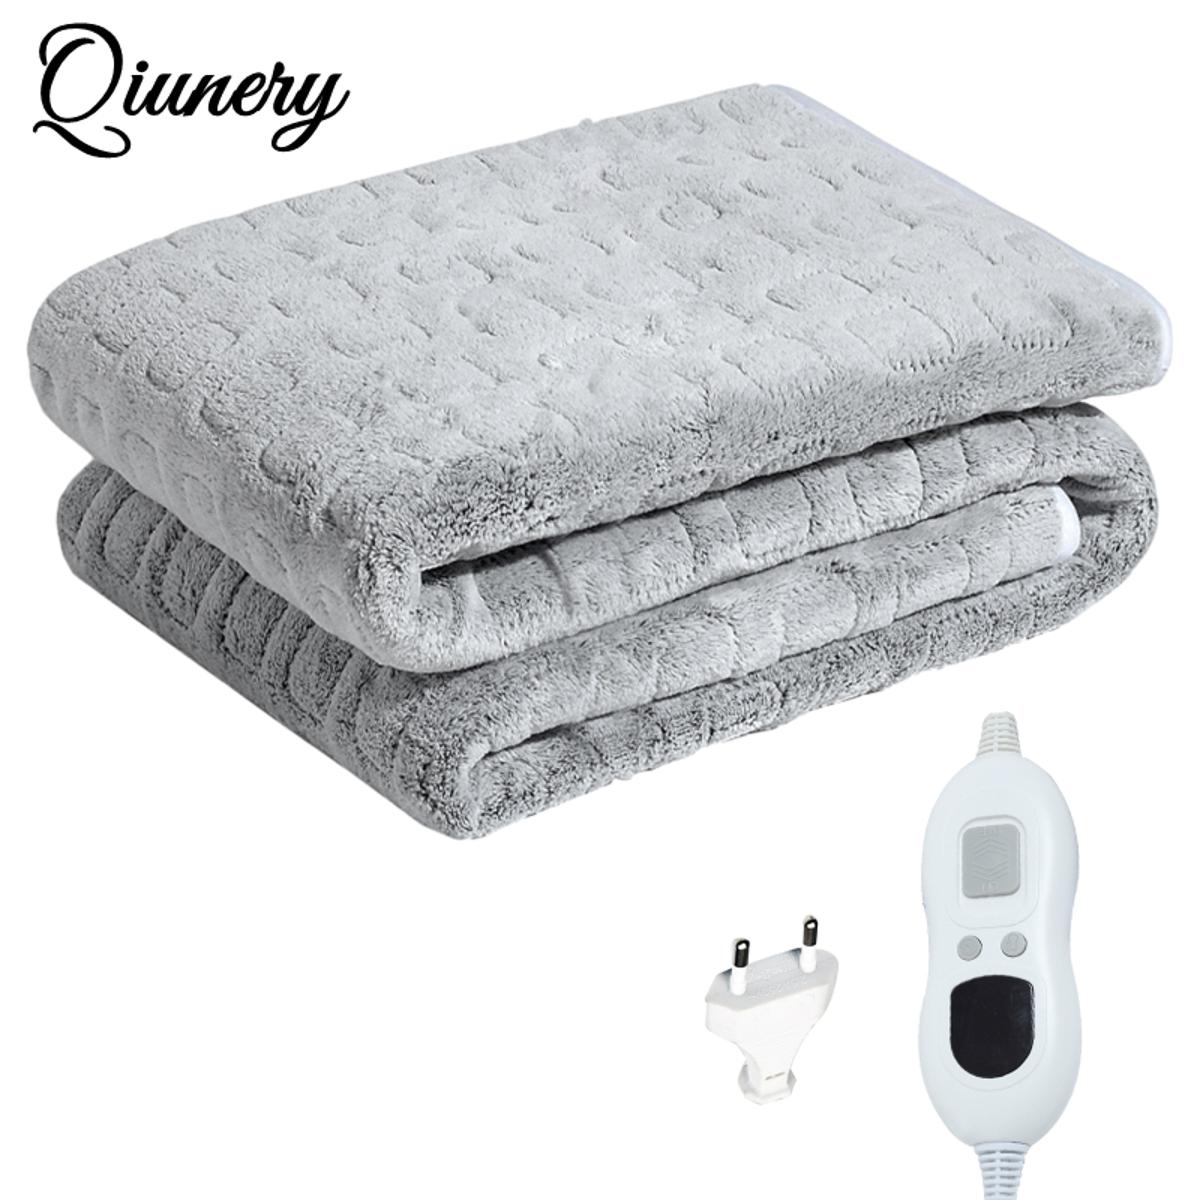 Flannel Electric Blanket 6 Temperature Levels Washable Soft Comfortable Heating Blanket With Timer Function